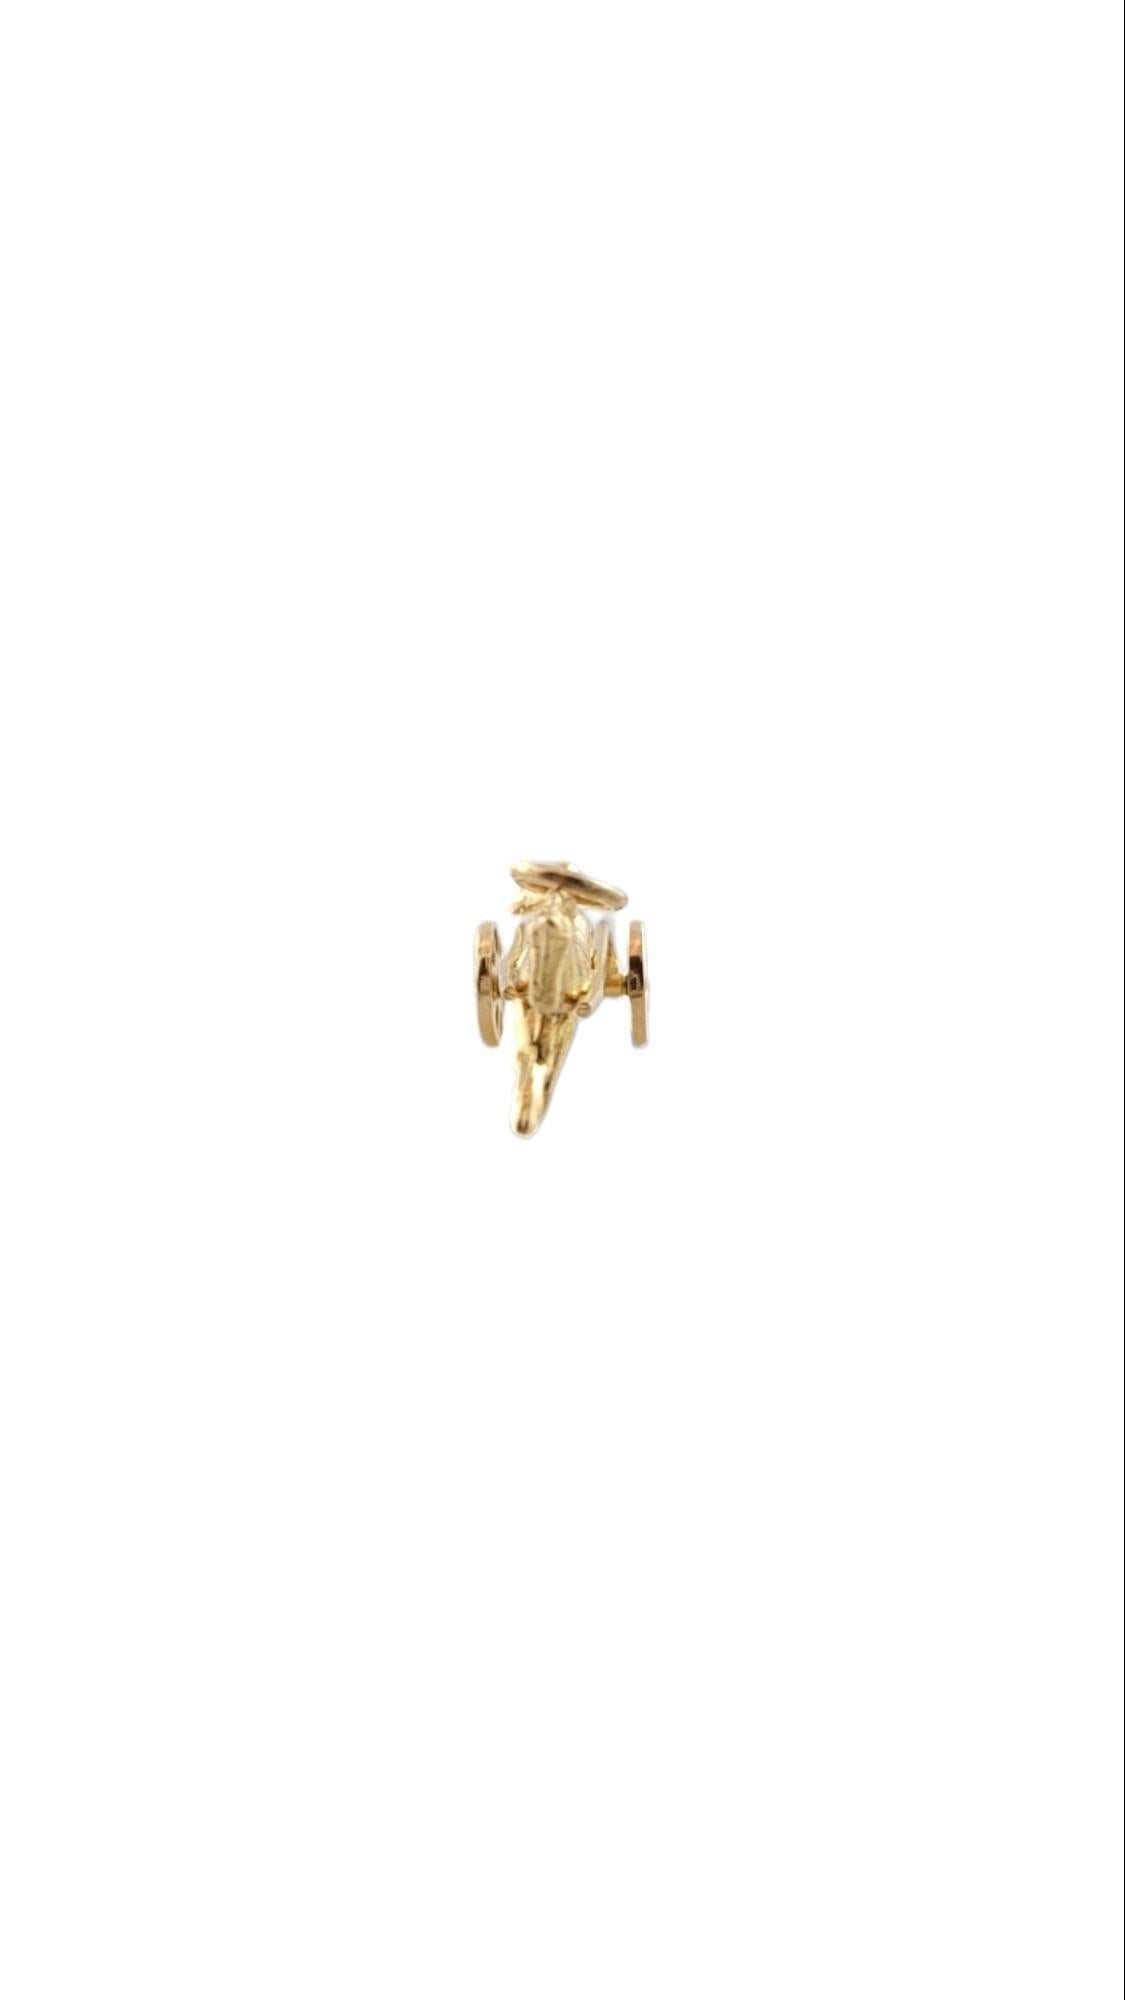 Vintage 14K Yellow Gold Horse Carriage Charm-

This adorable horse carriage charm is crafted in beautifully detailed 14K yellow gold. 

Size: 11.3mm X 22.3mm 

Stamped: 14K 

Weight: 1.79g/1.1dwt

Very good condition, professionally polished.

Will